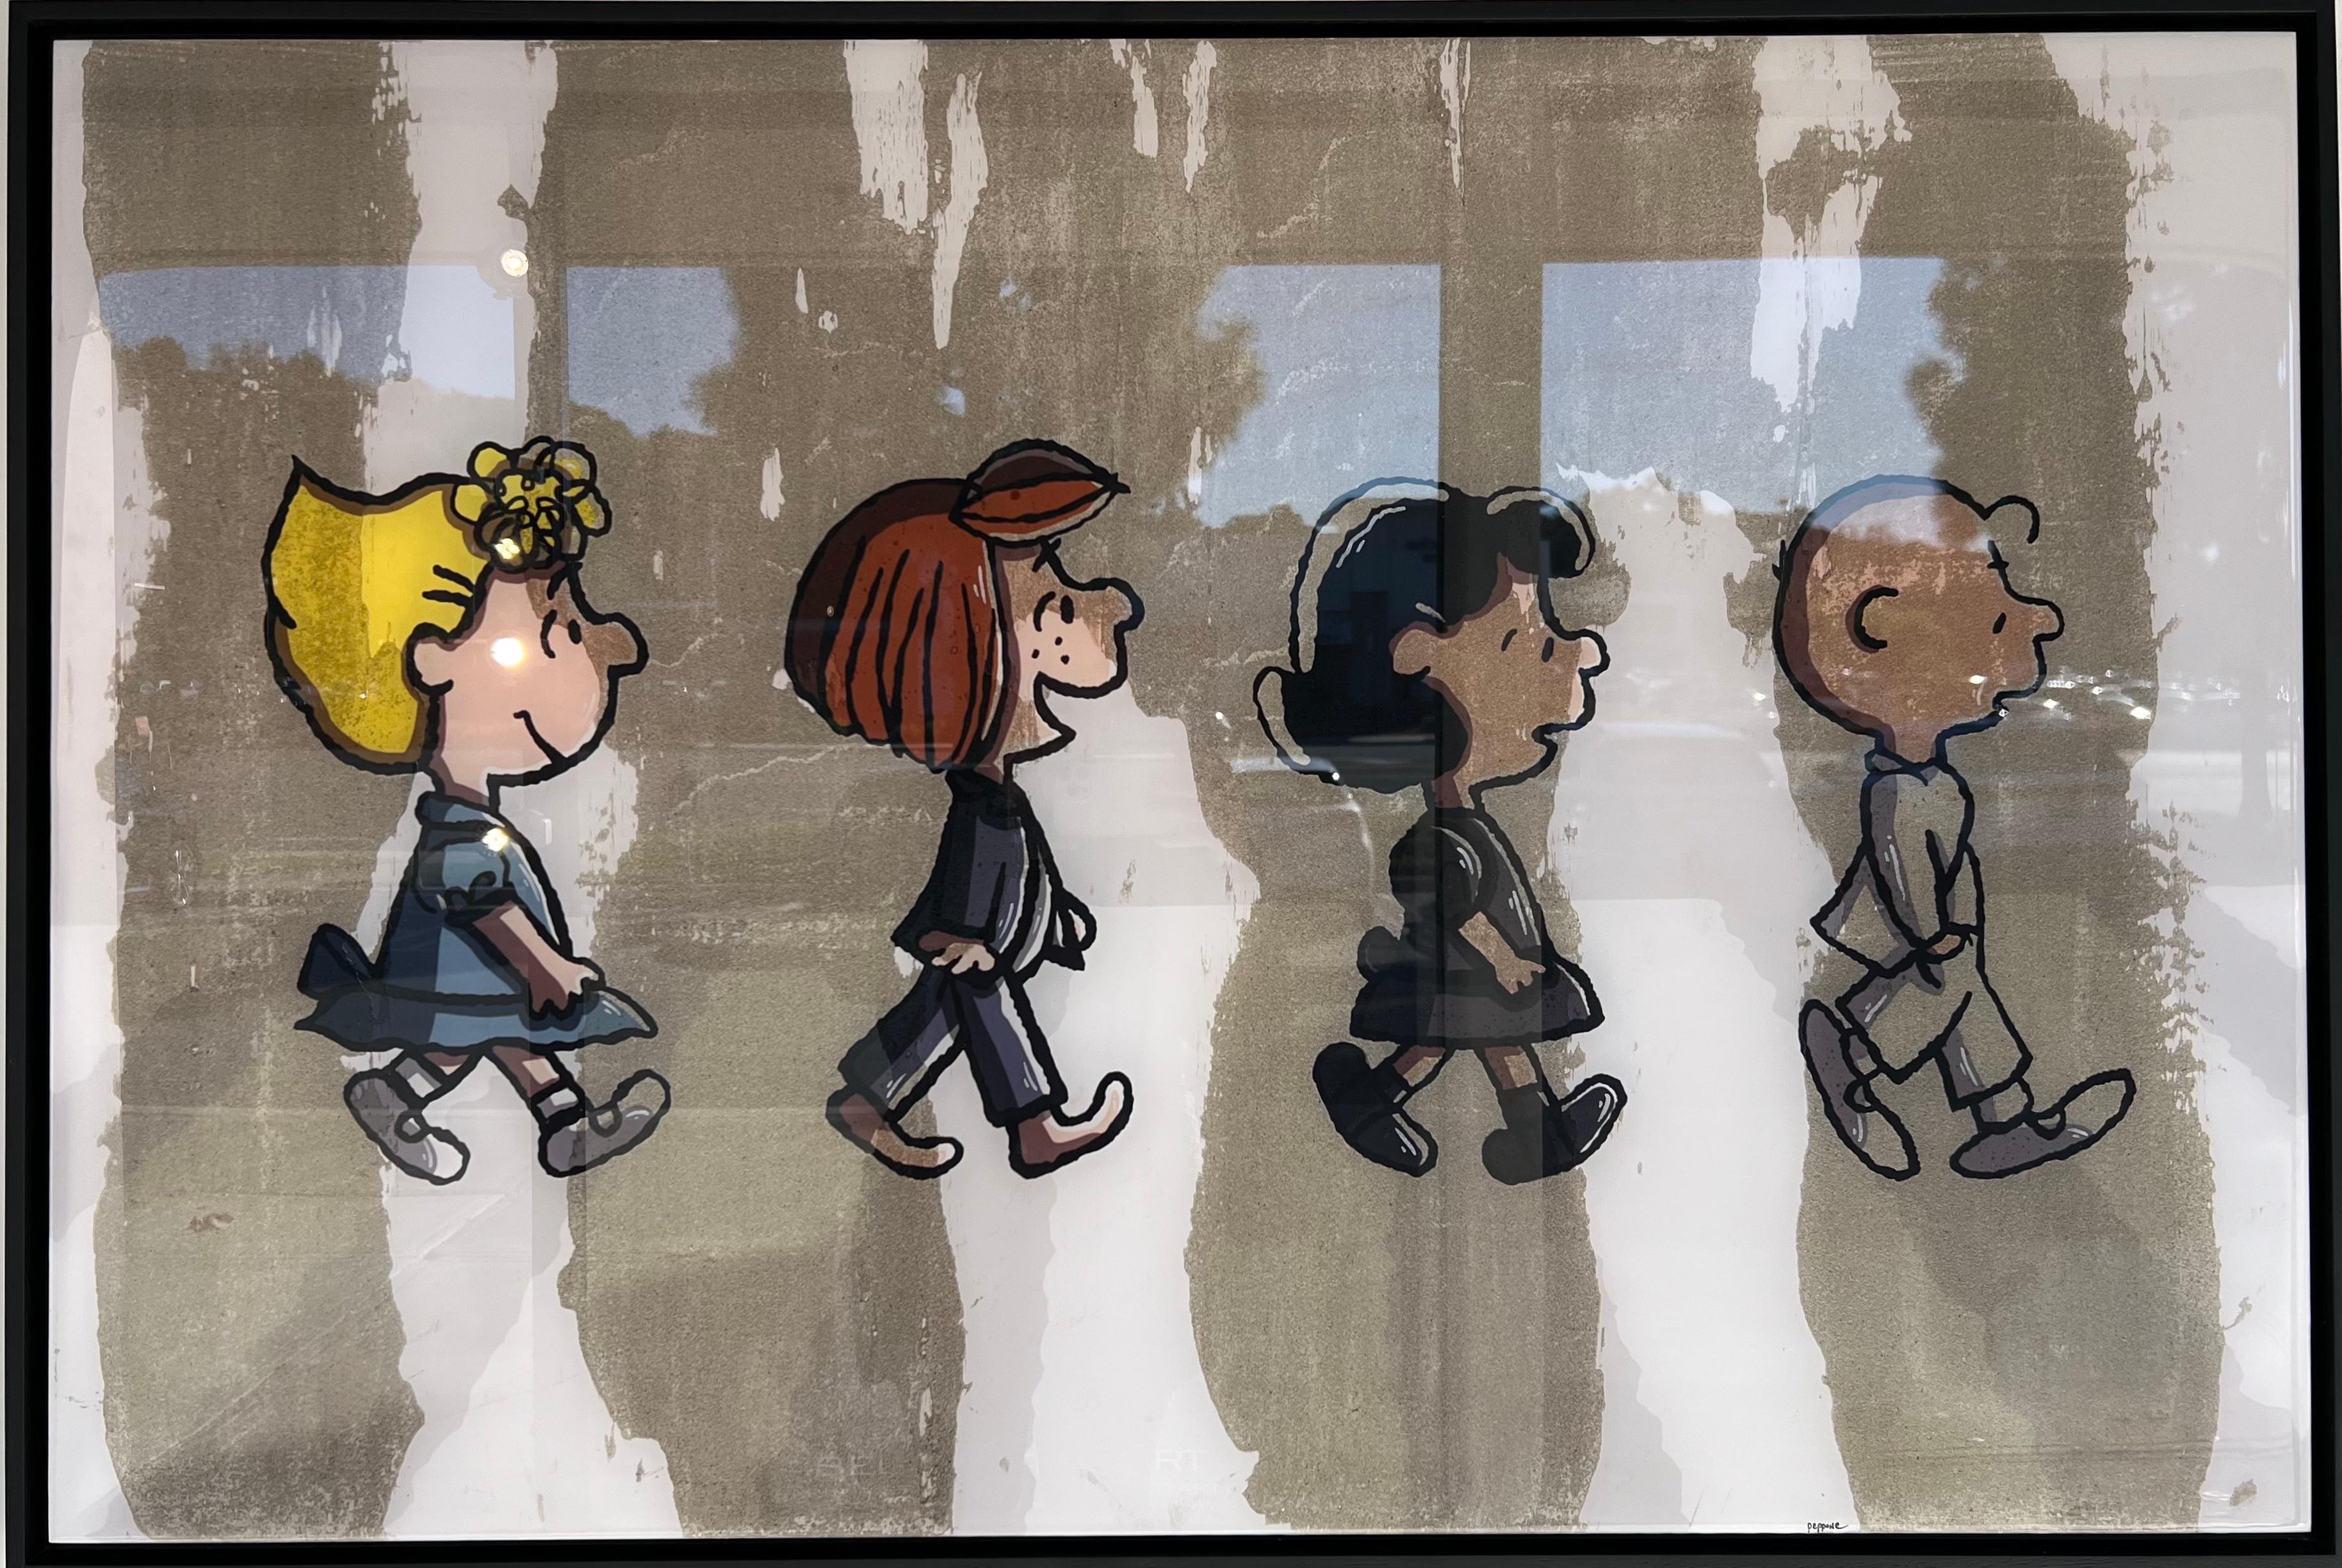 Abbey Road - Edition 1 - Mixed Media Art by Peppone